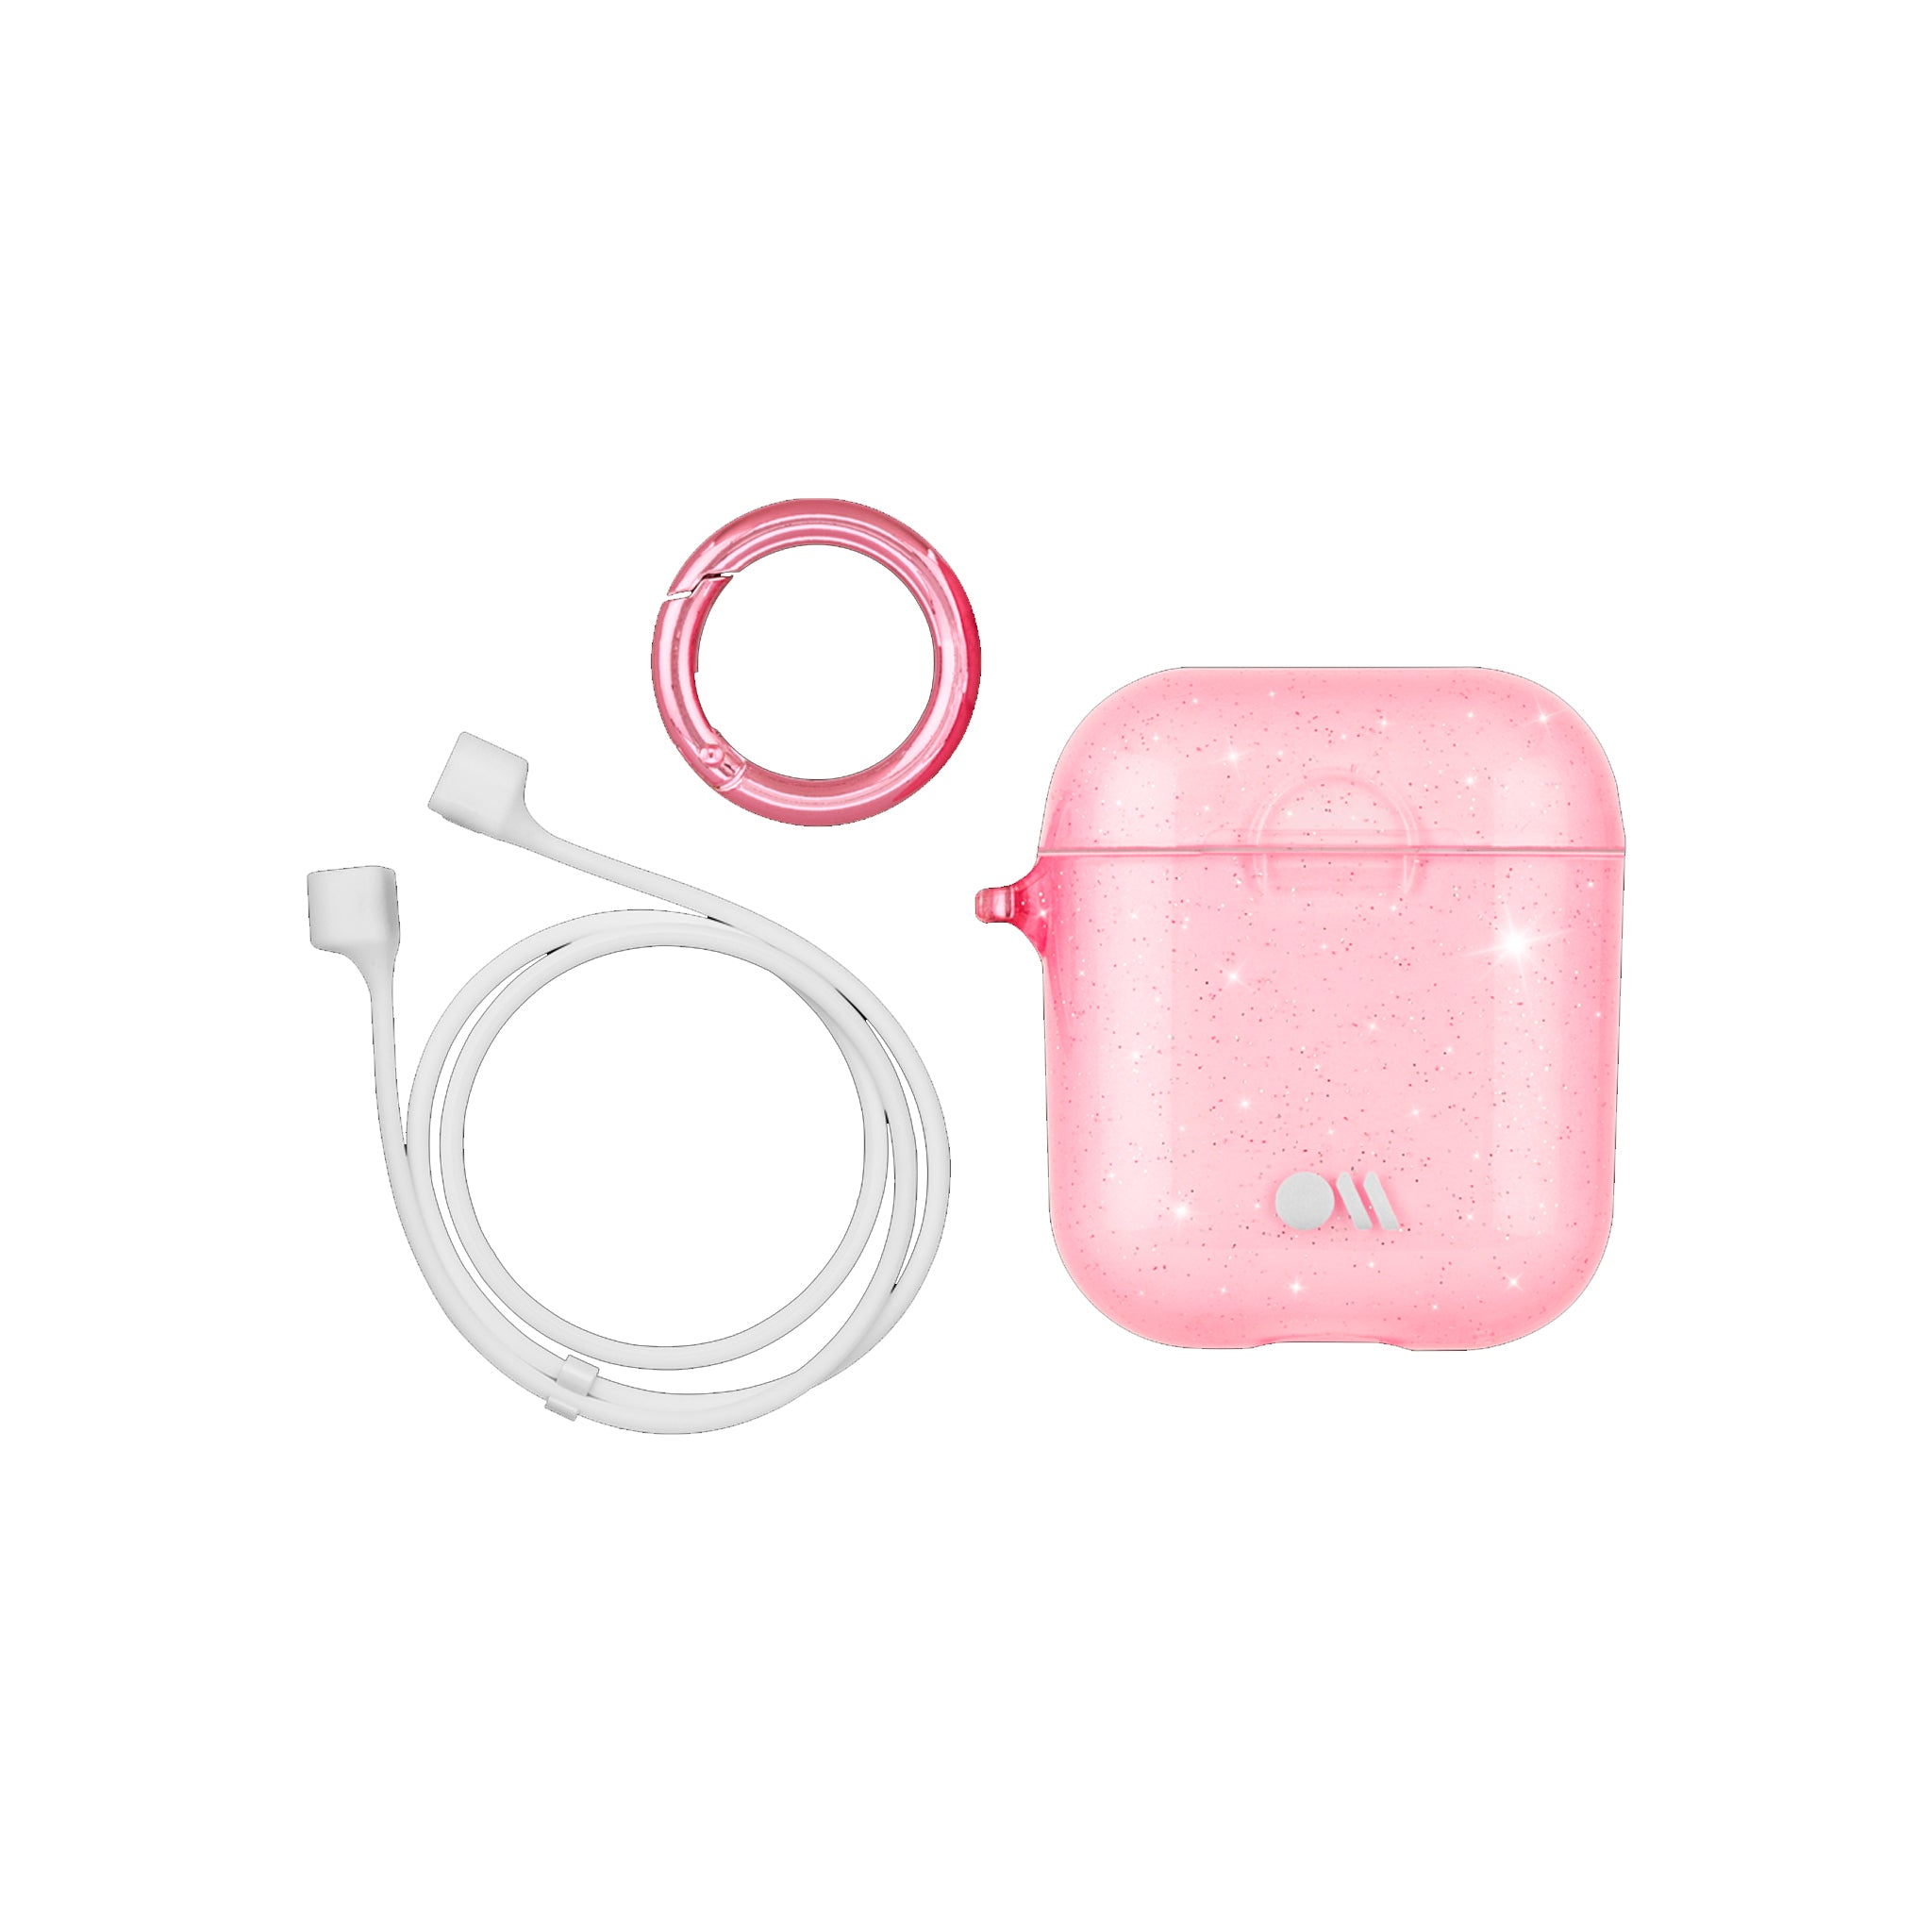 Case-mate - Hook Ups Case With Neck Strap For Apple Airpods - Blush